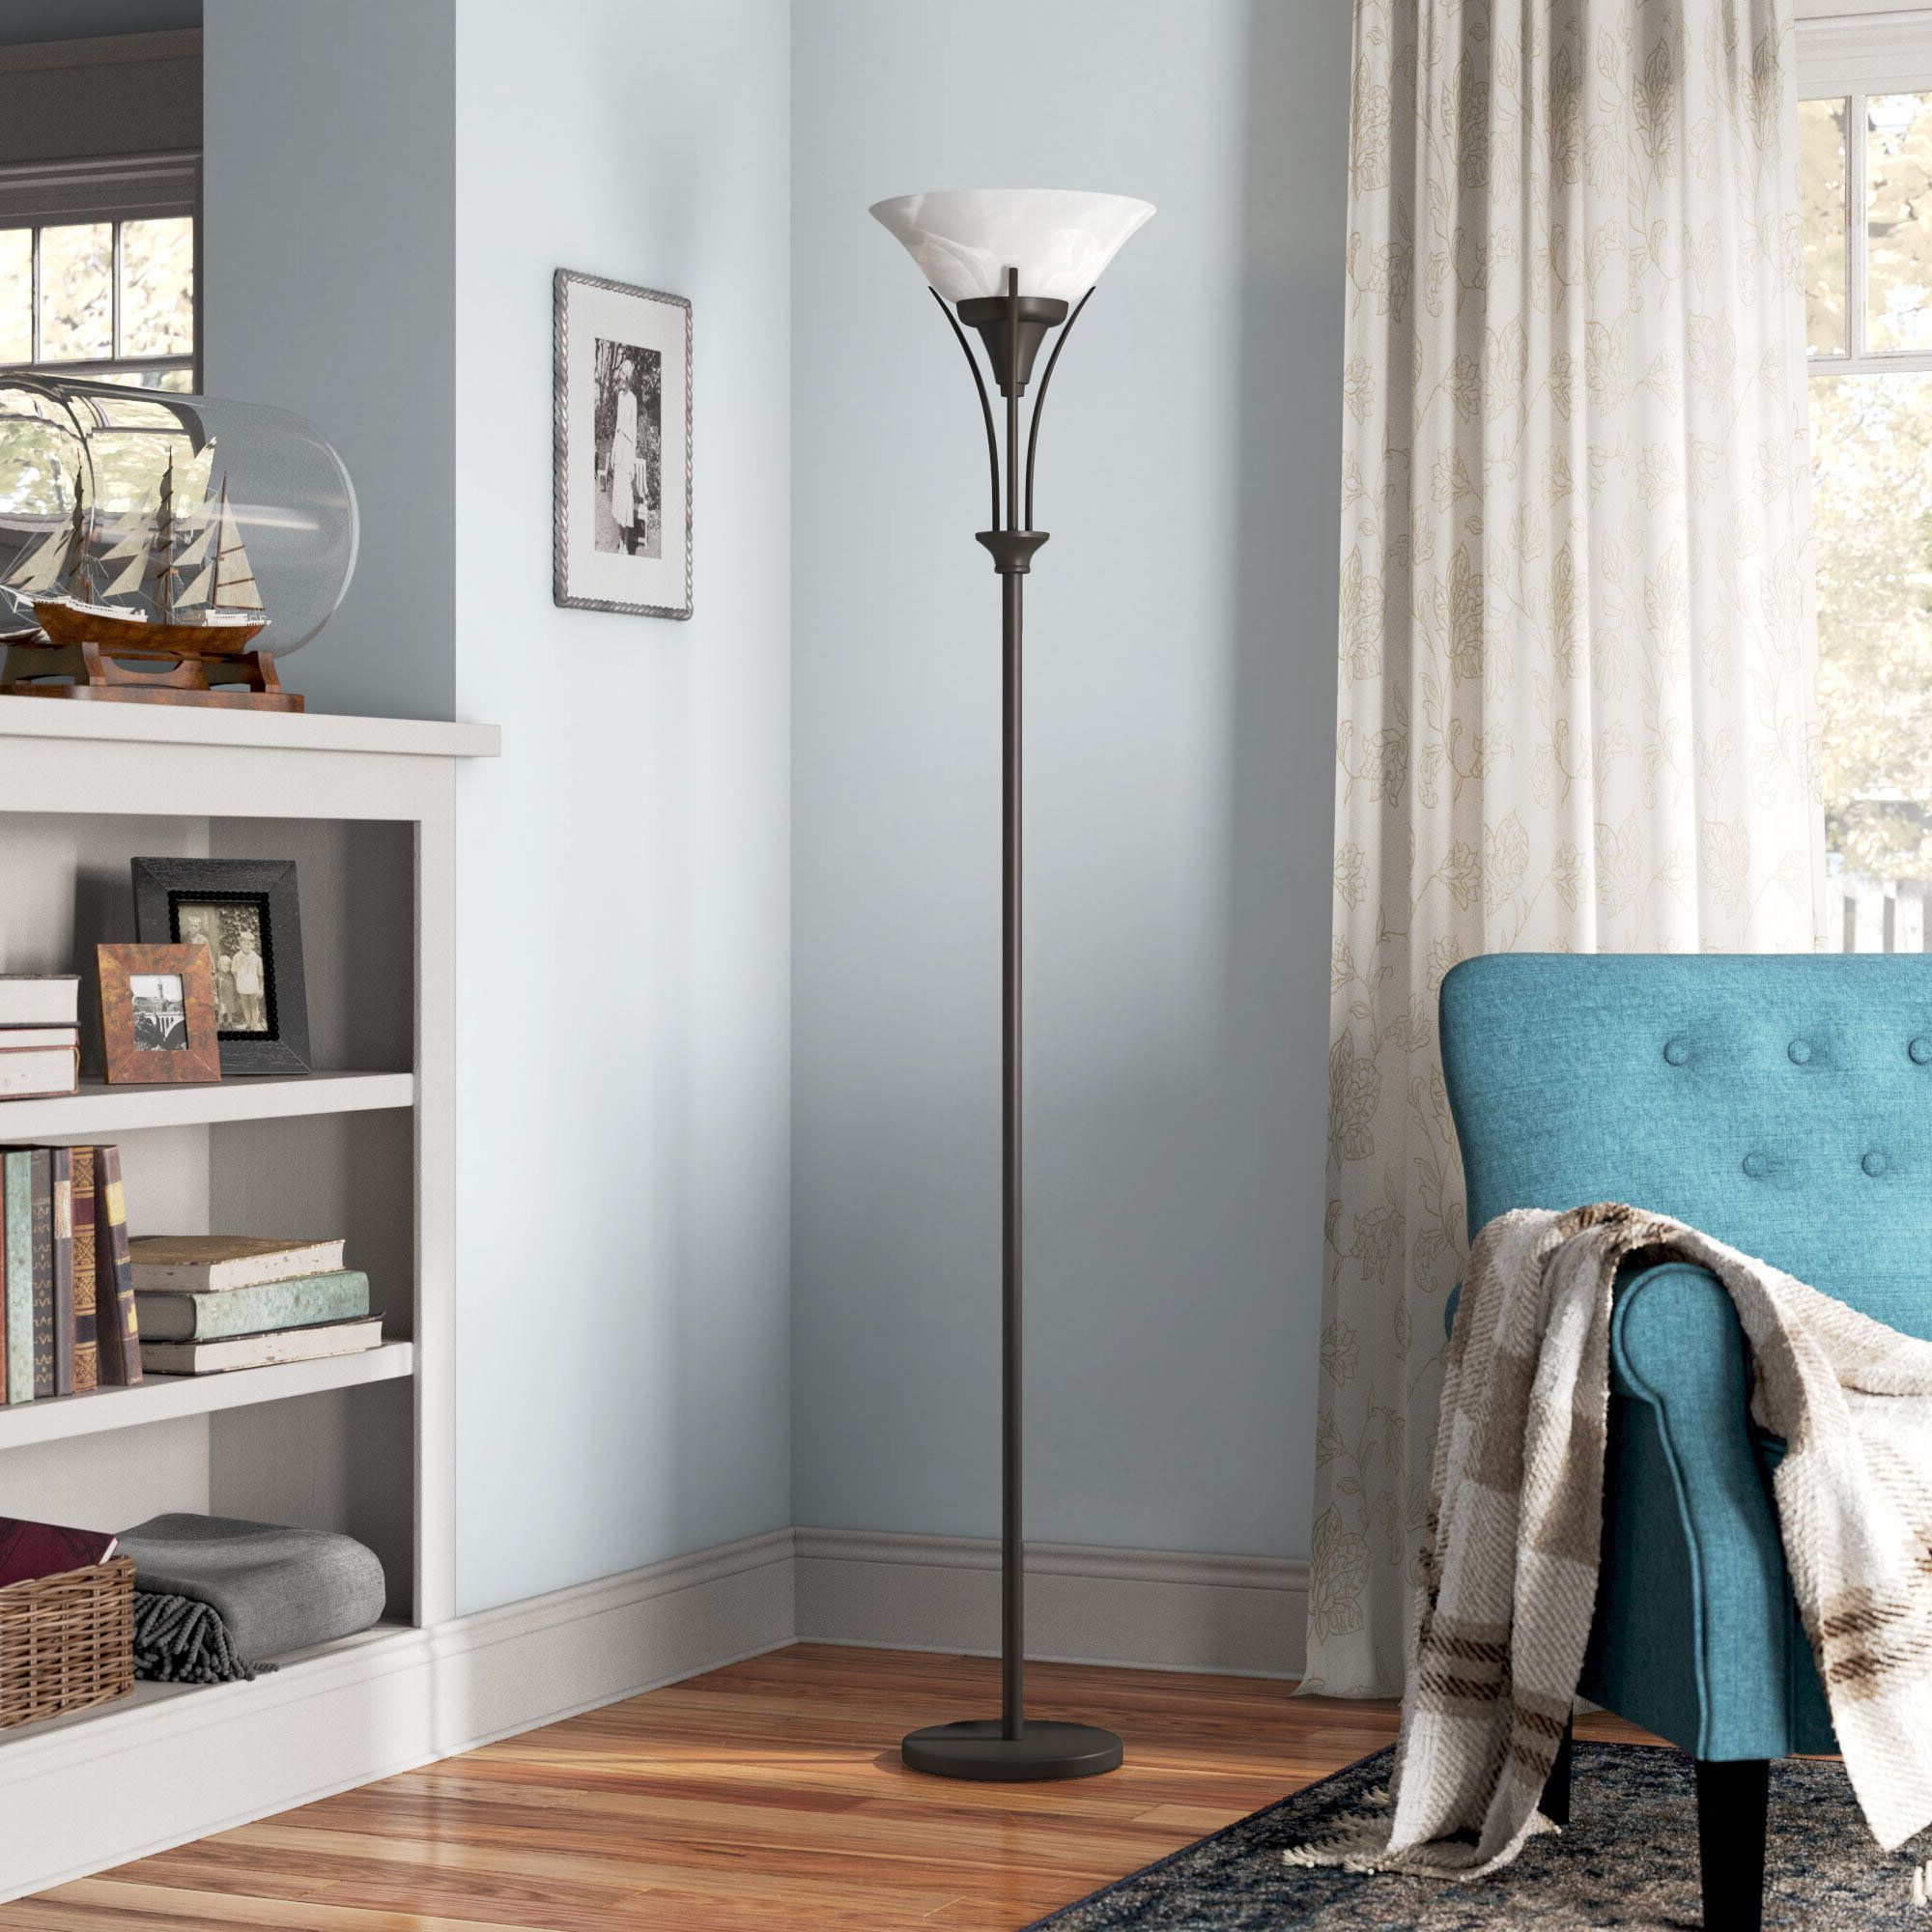 Wayfair | Extra Tall (70+ Inches) Floor Lamps With Regard To 70 Inch Floor Lamps (View 1 of 20)